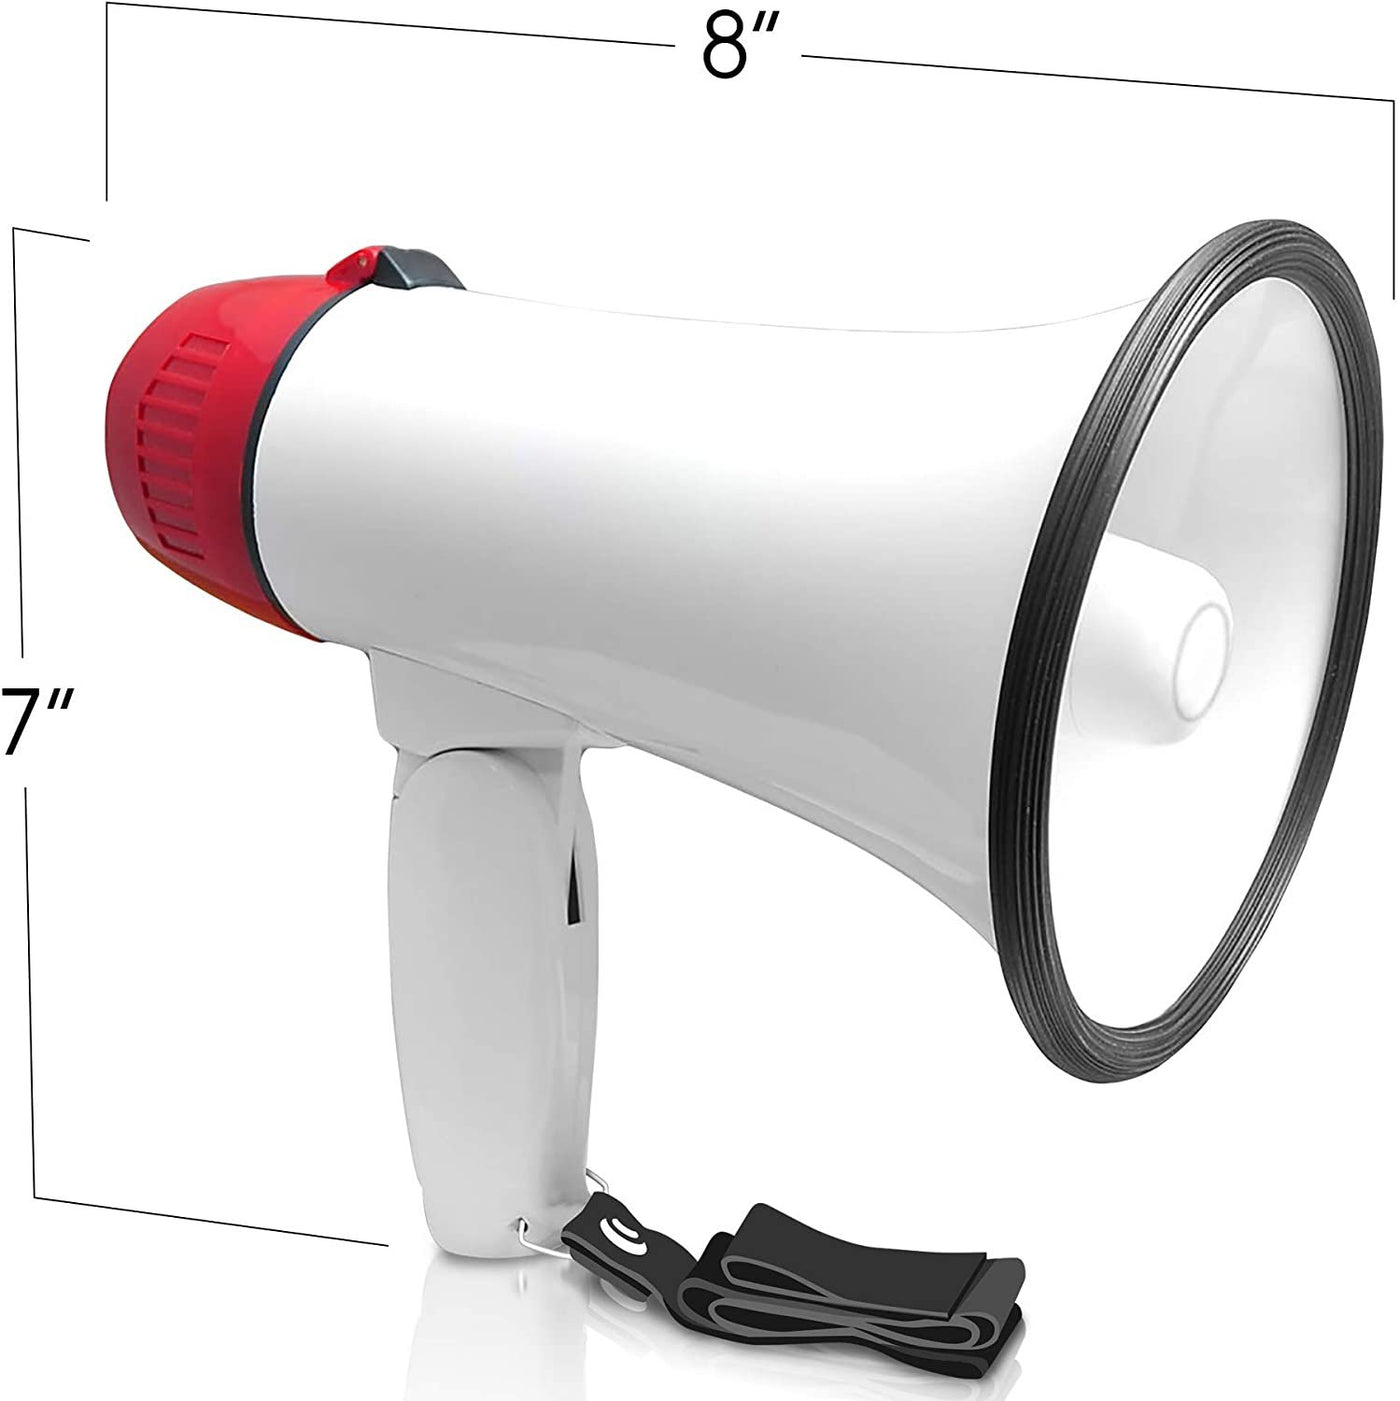 Battery-Operated Megaphone - Set of 2 - Portable Mega Phone Loud Speaker with Siren, Volume Control and Hanging Strap - Great Prize for Kids and Adults - Blue and Red